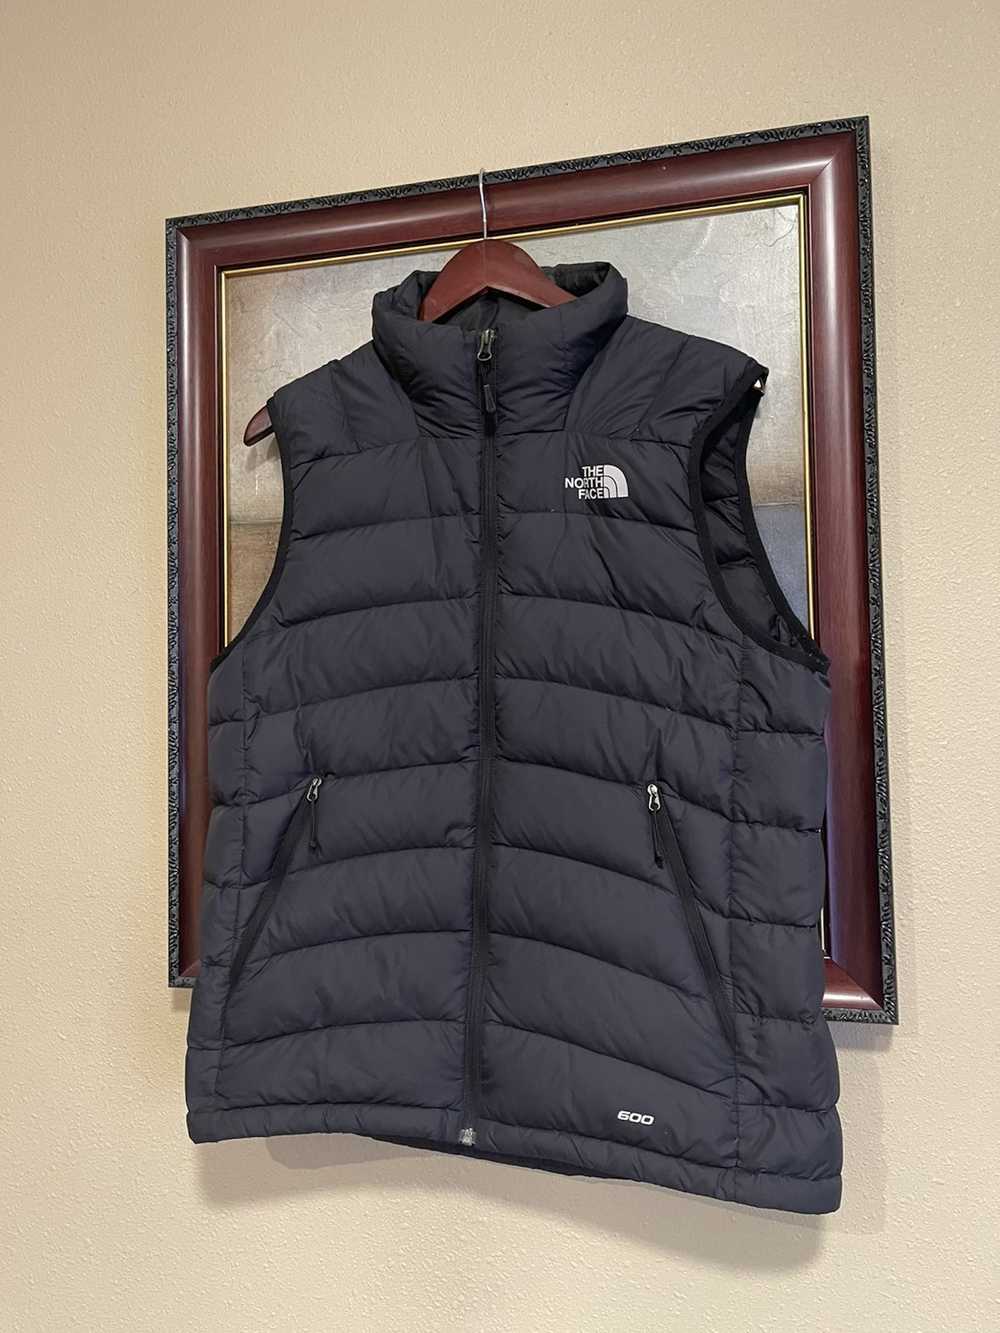 The North Face The north face men’s vest M - image 4